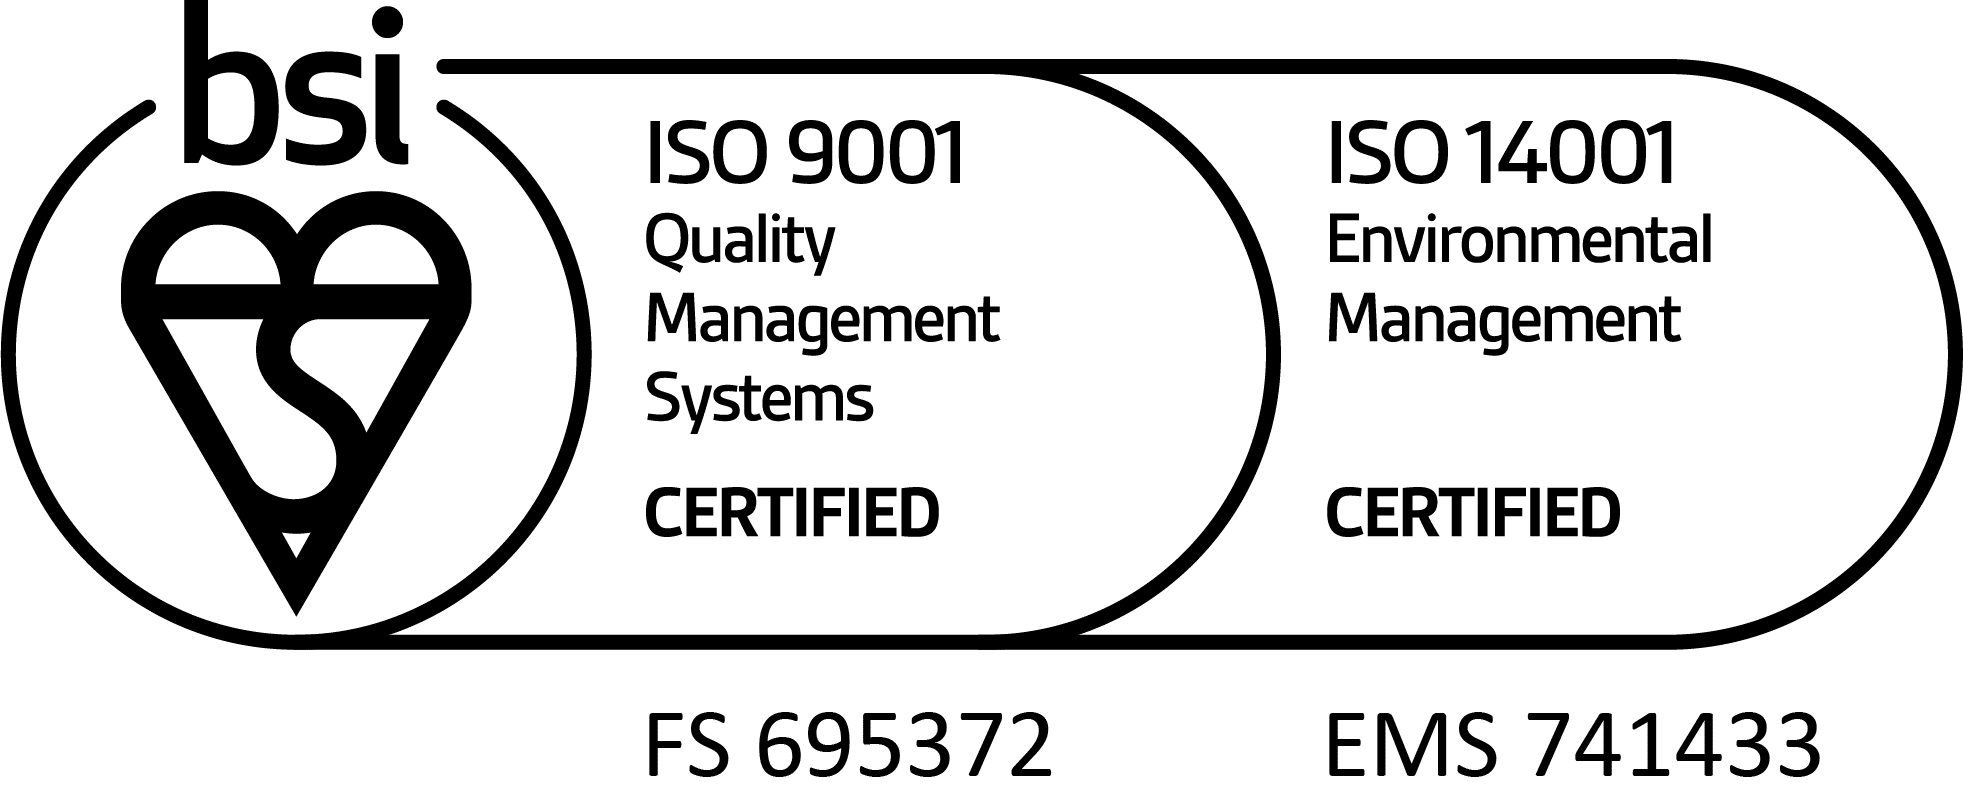 ISO 9001 Quality Management & ISO 14001 Environmental Management Certified Logo